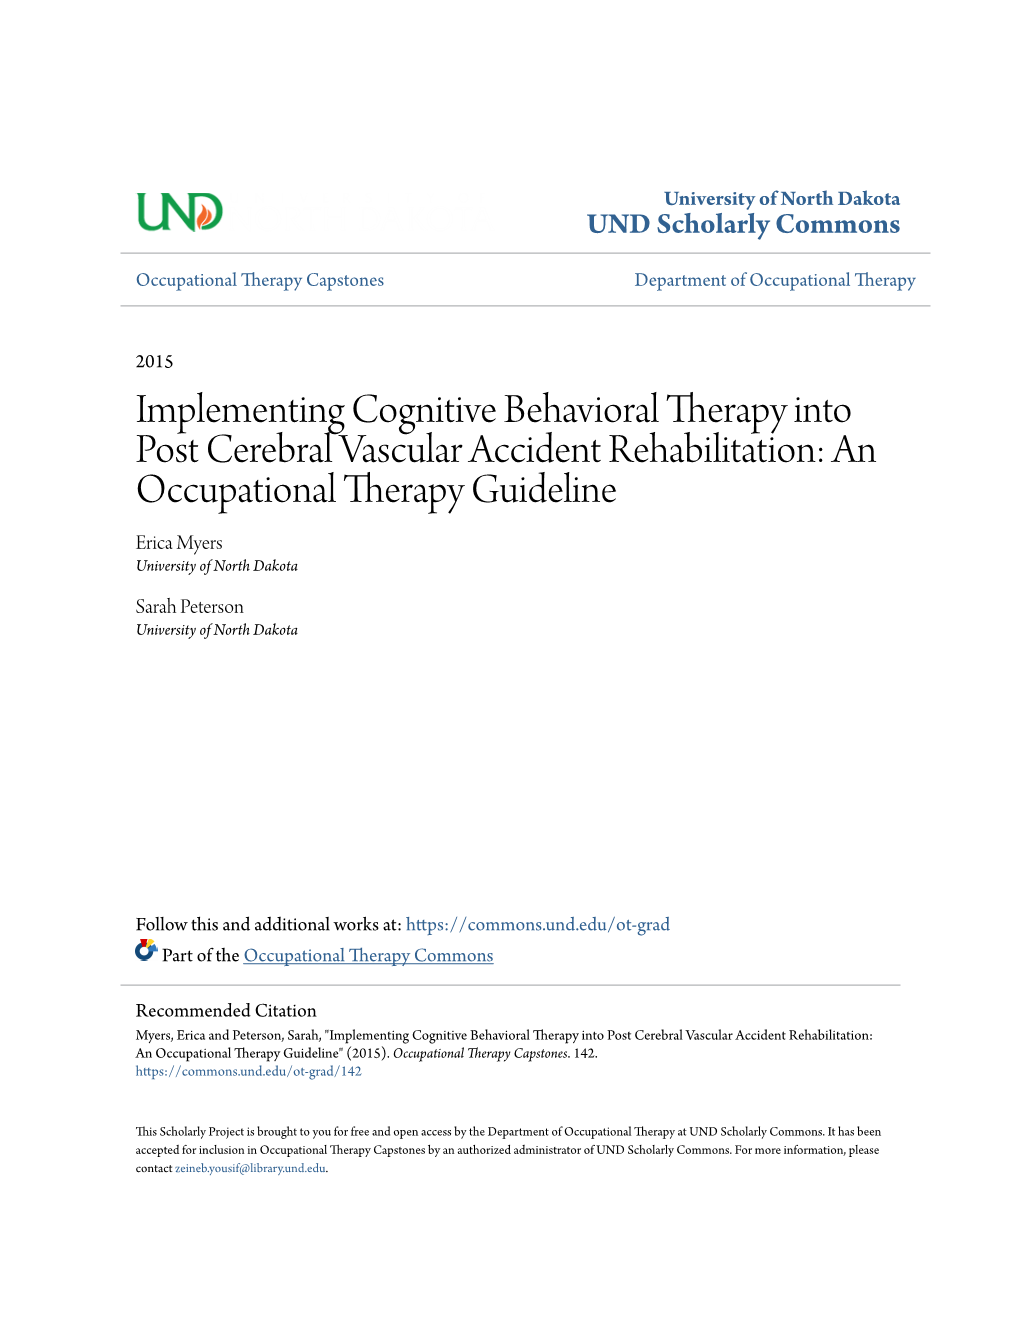 Implementing Cognitive Behavioral Therapy Into Post Cerebral